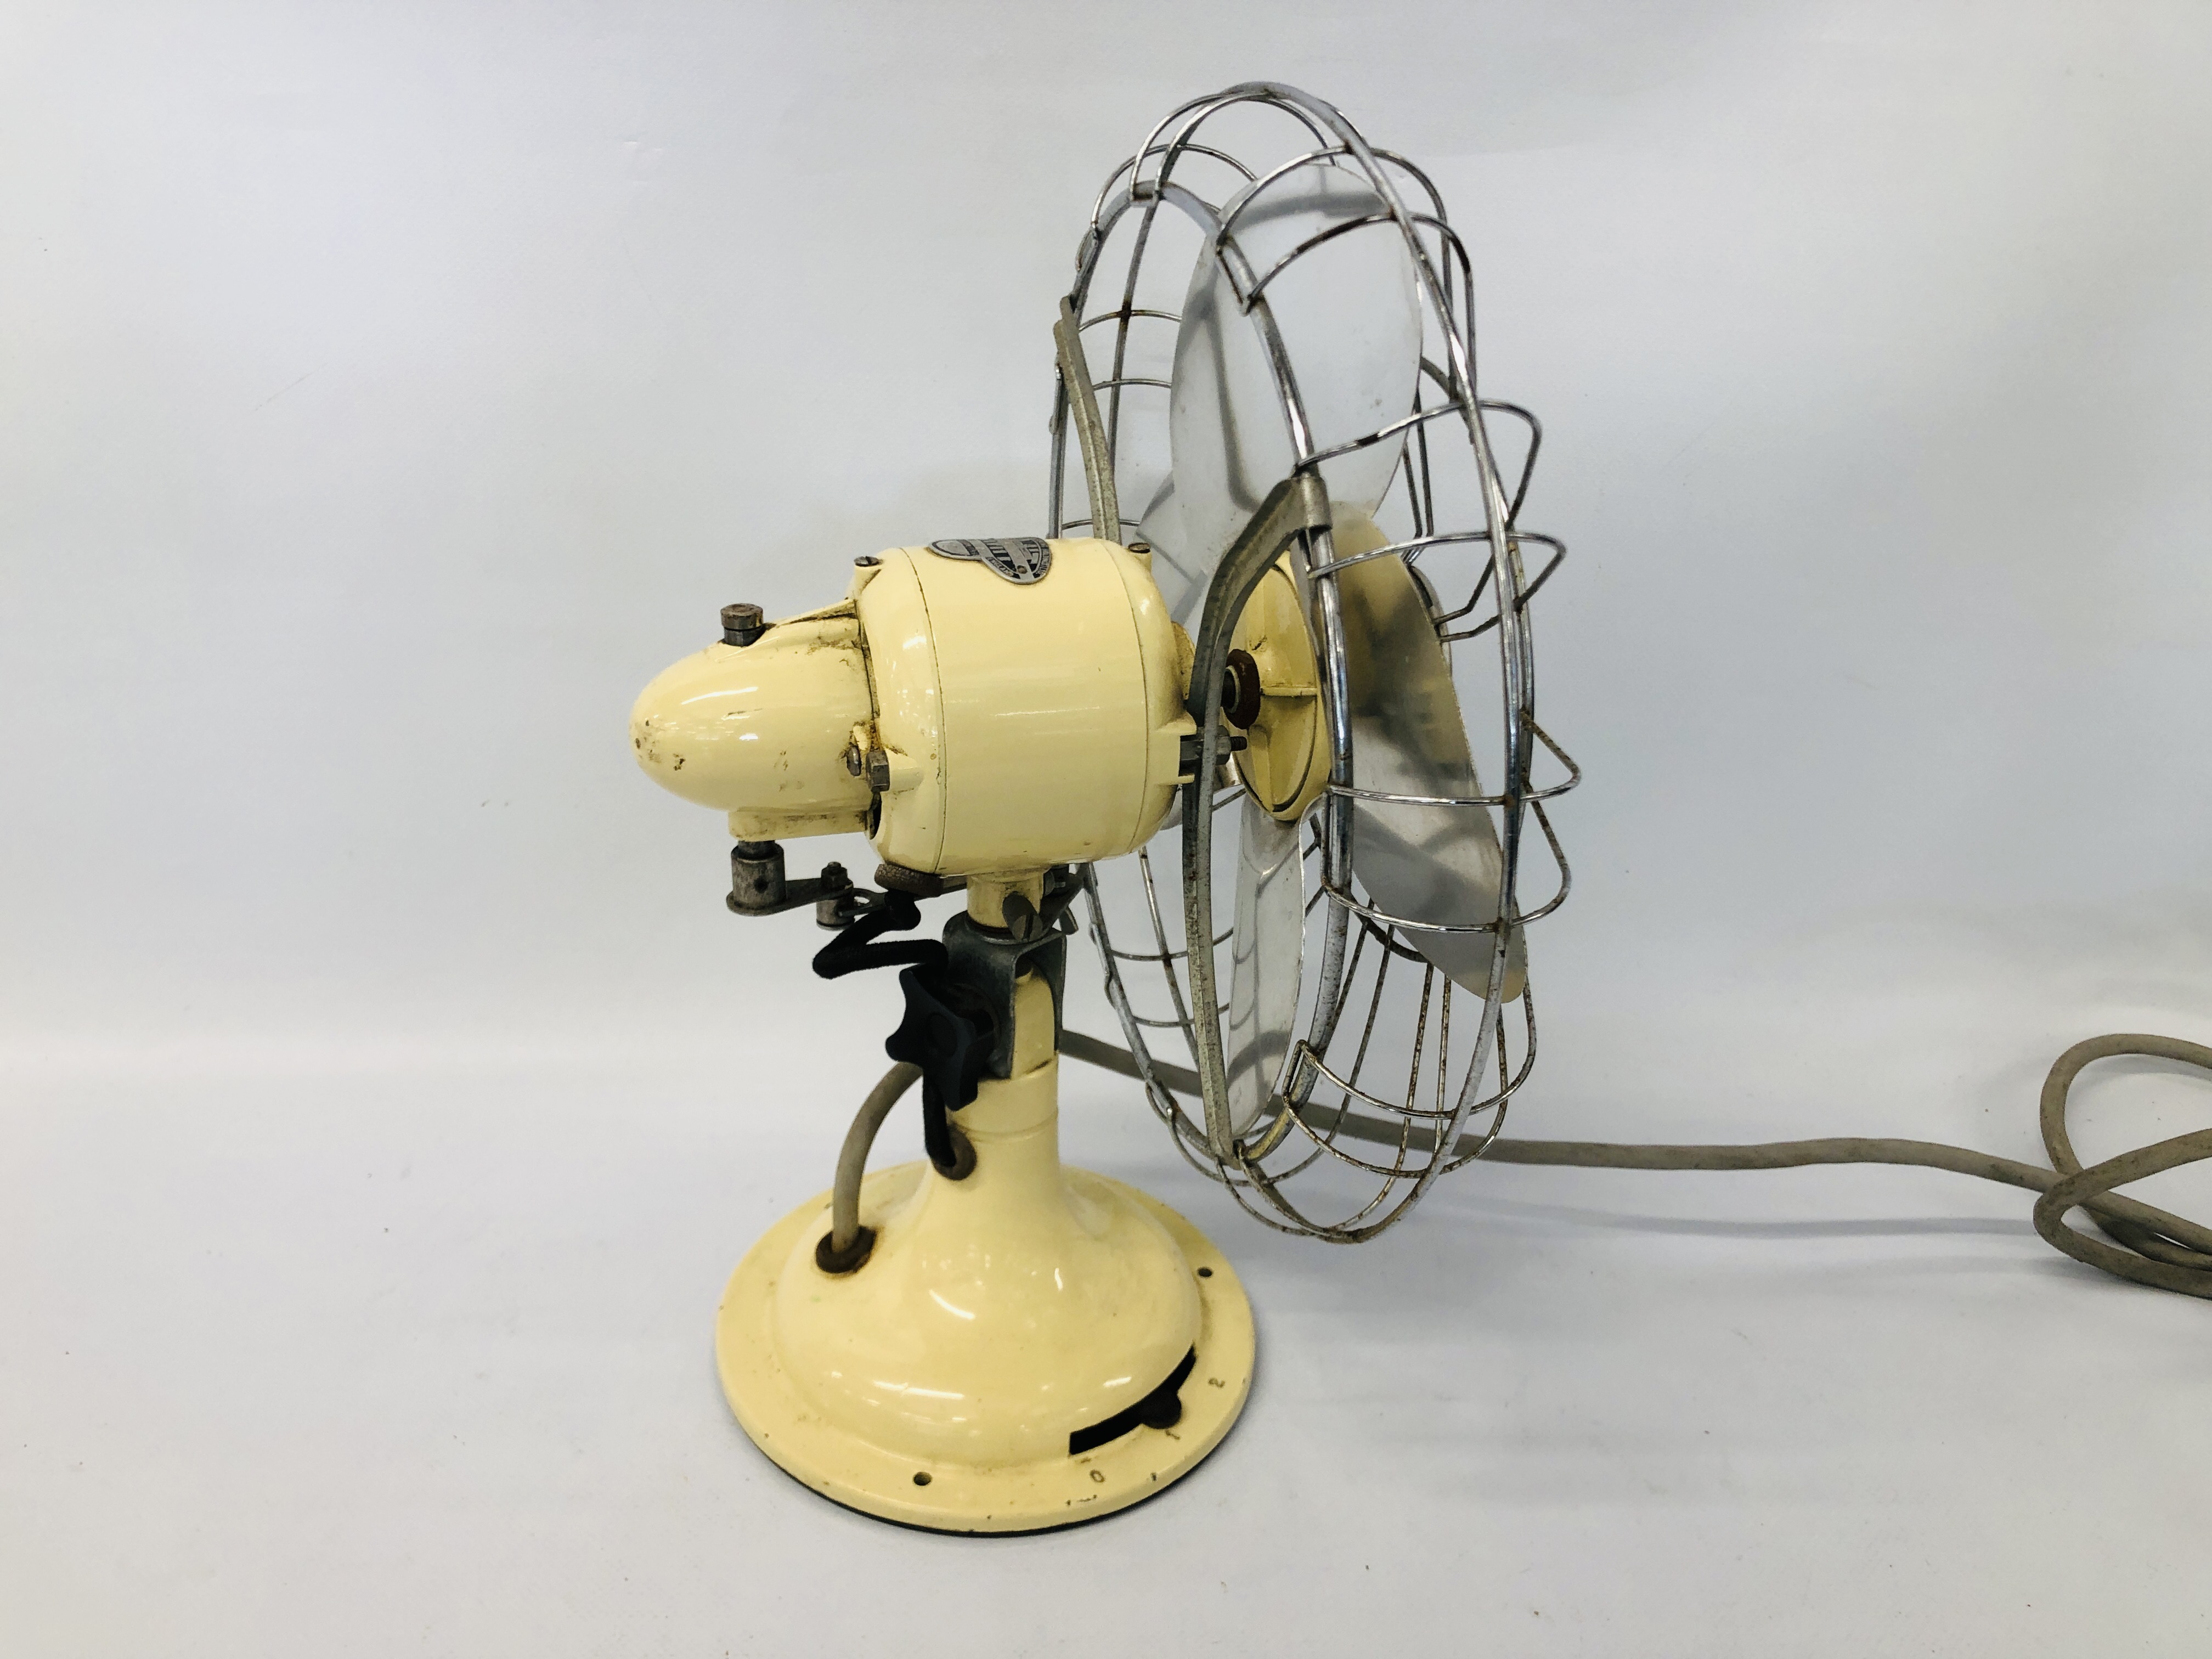 A VINTAGE 1950's LIMIT TABLE FAN No. C1/11/66 - COLLECTORS ITEM ONLY. - Image 4 of 5